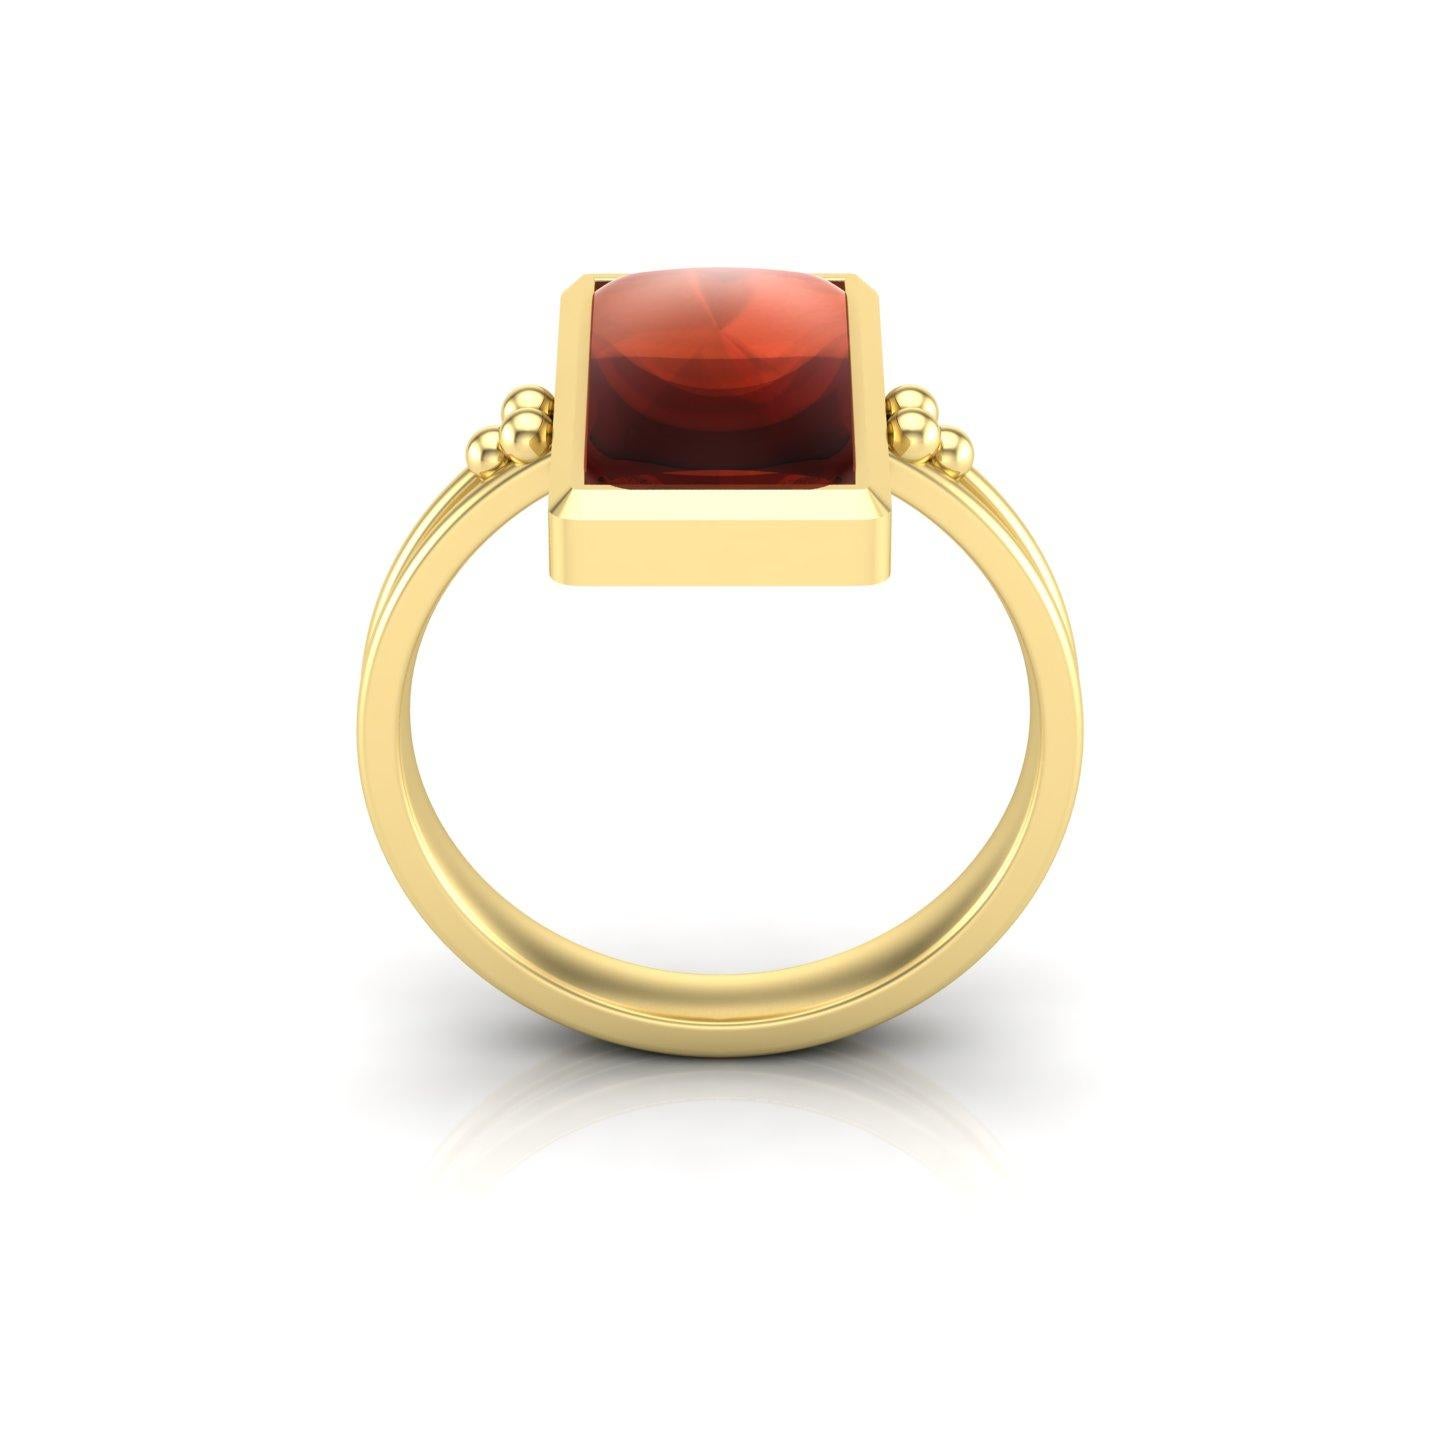 For Sale:  22 Karat Gold Garnet Ring by Romae Jewelry - Inspired by Ancient Designs 7